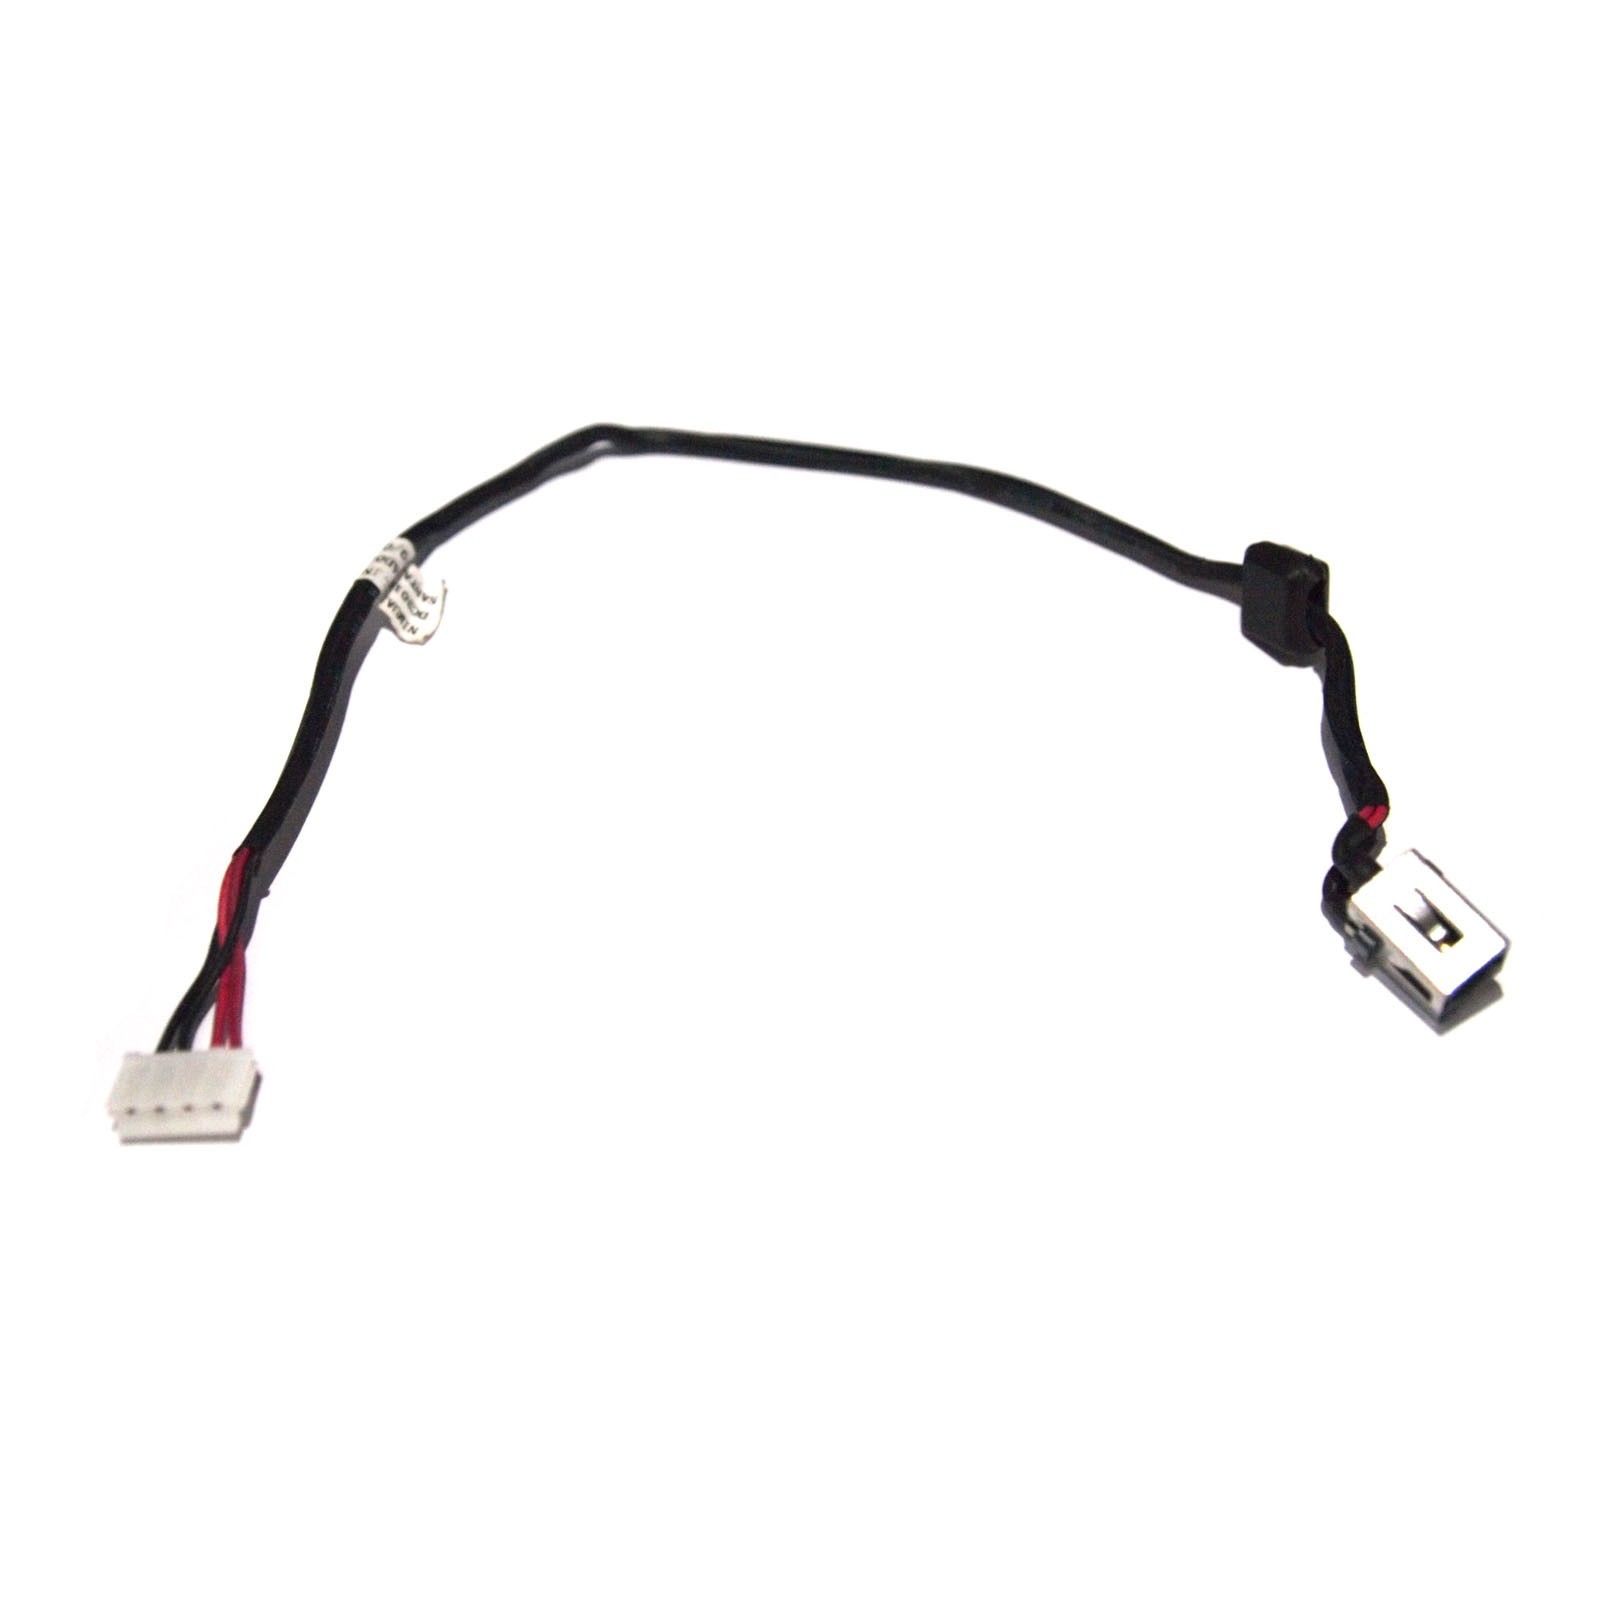 dell c84 3 pin trs connector power cord wiring diagram